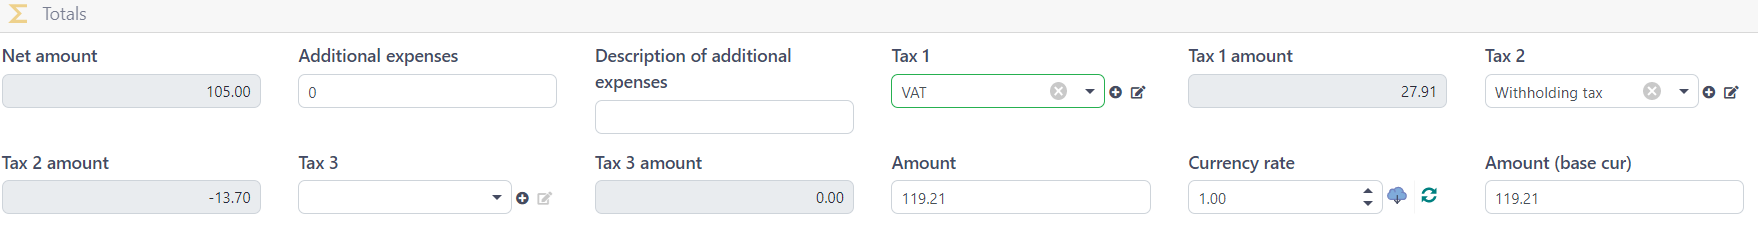 Screenshot of Trados Studio's 'Totals' section showing incorrect tax calculations with a net amount of 105.00, Tax 1 amount as 27.91 instead of 22.05, and Tax 2 amount as -13.70 instead of -15.75.